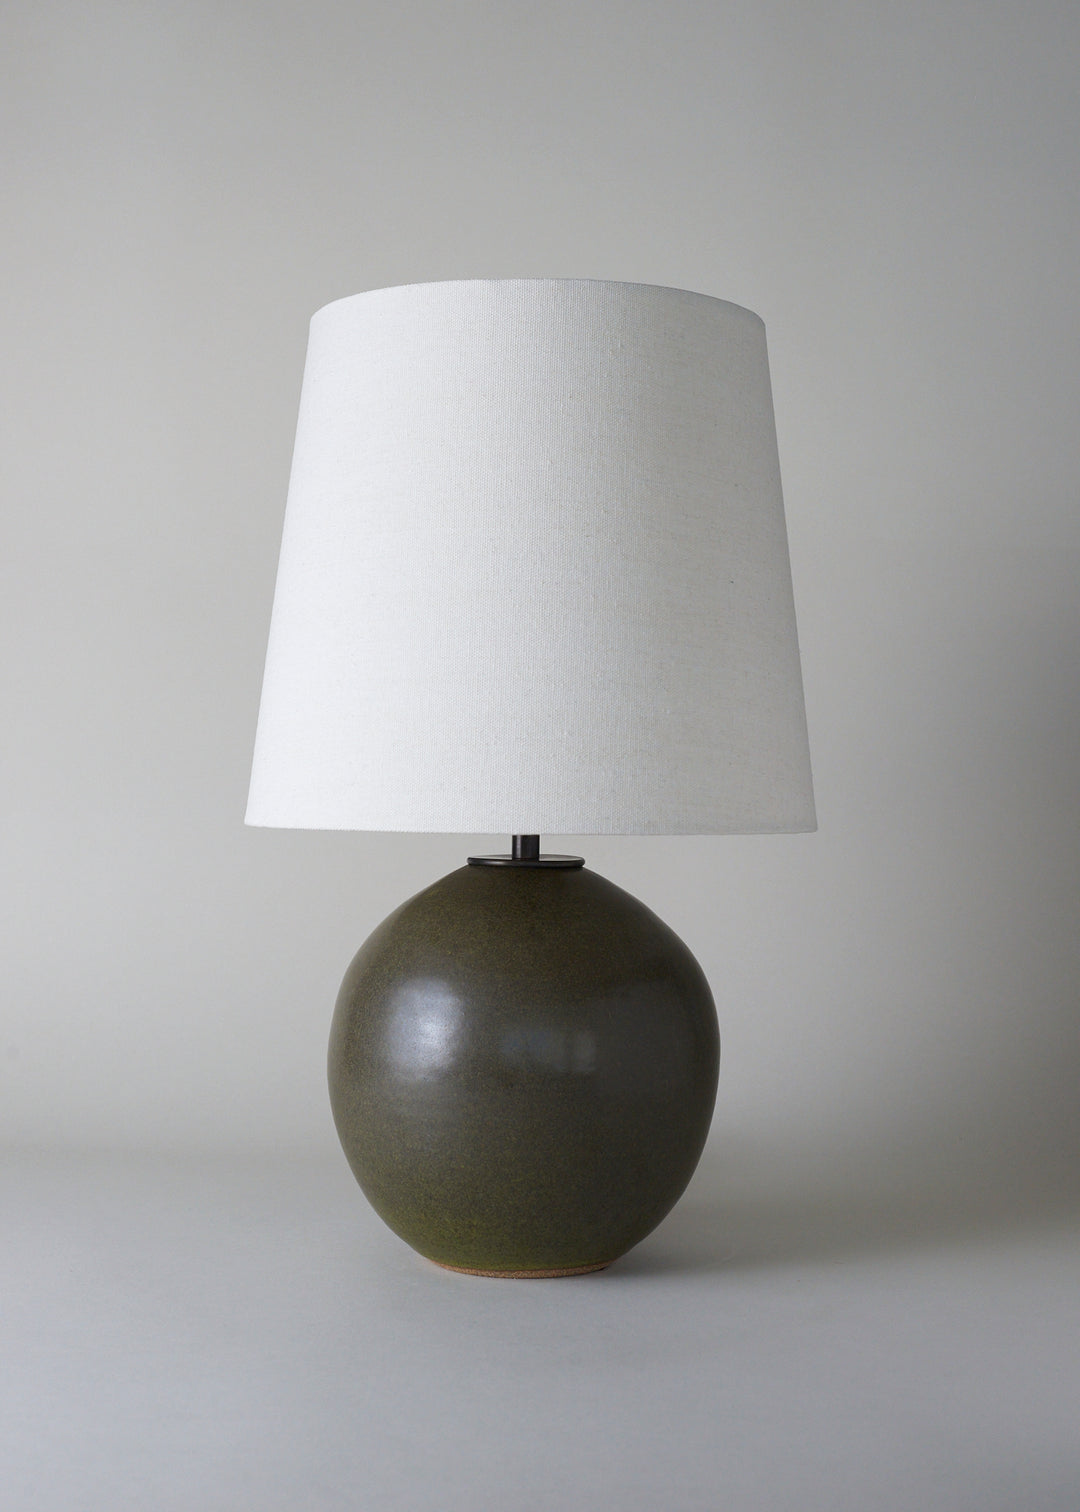 Small Orb Lamp in Olive - Victoria Morris Pottery